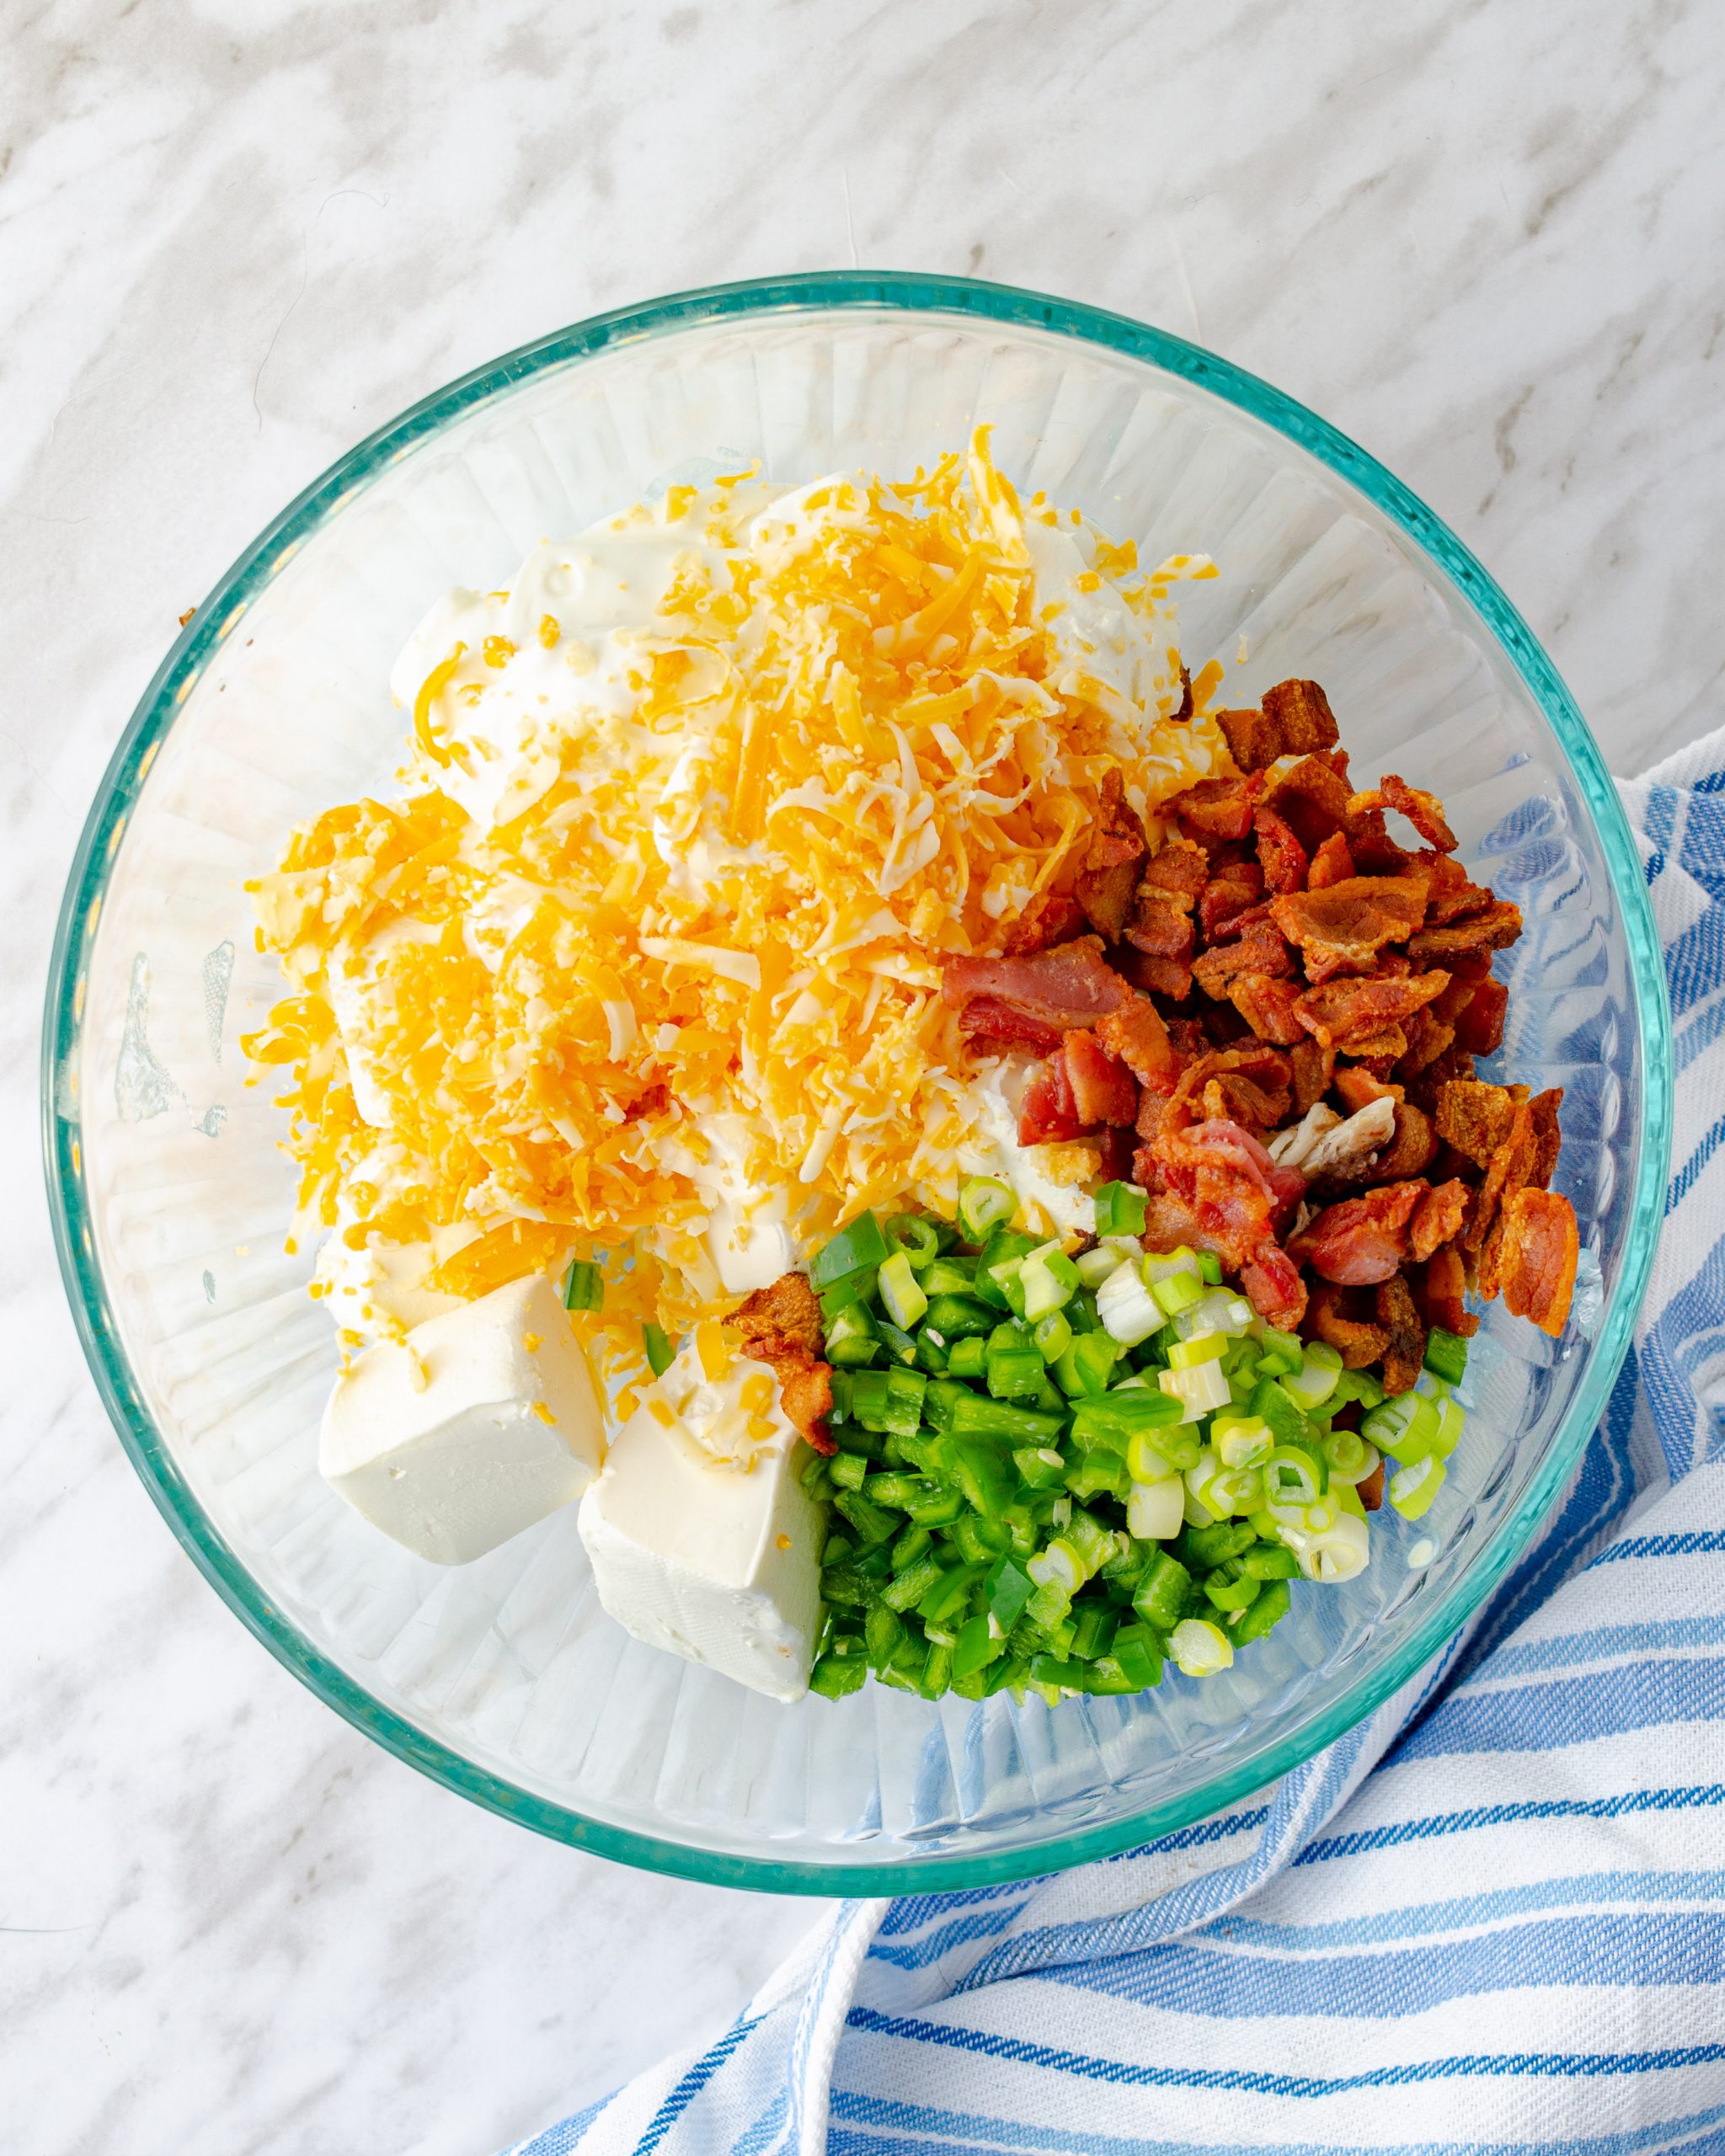 Combine the sour cream, ¾ of the bacon pieces, 1 ½ cups of the cheese, ½ of the green onions, and the Jalapeno peppers in a mixing bowl. Stir to mix well. 